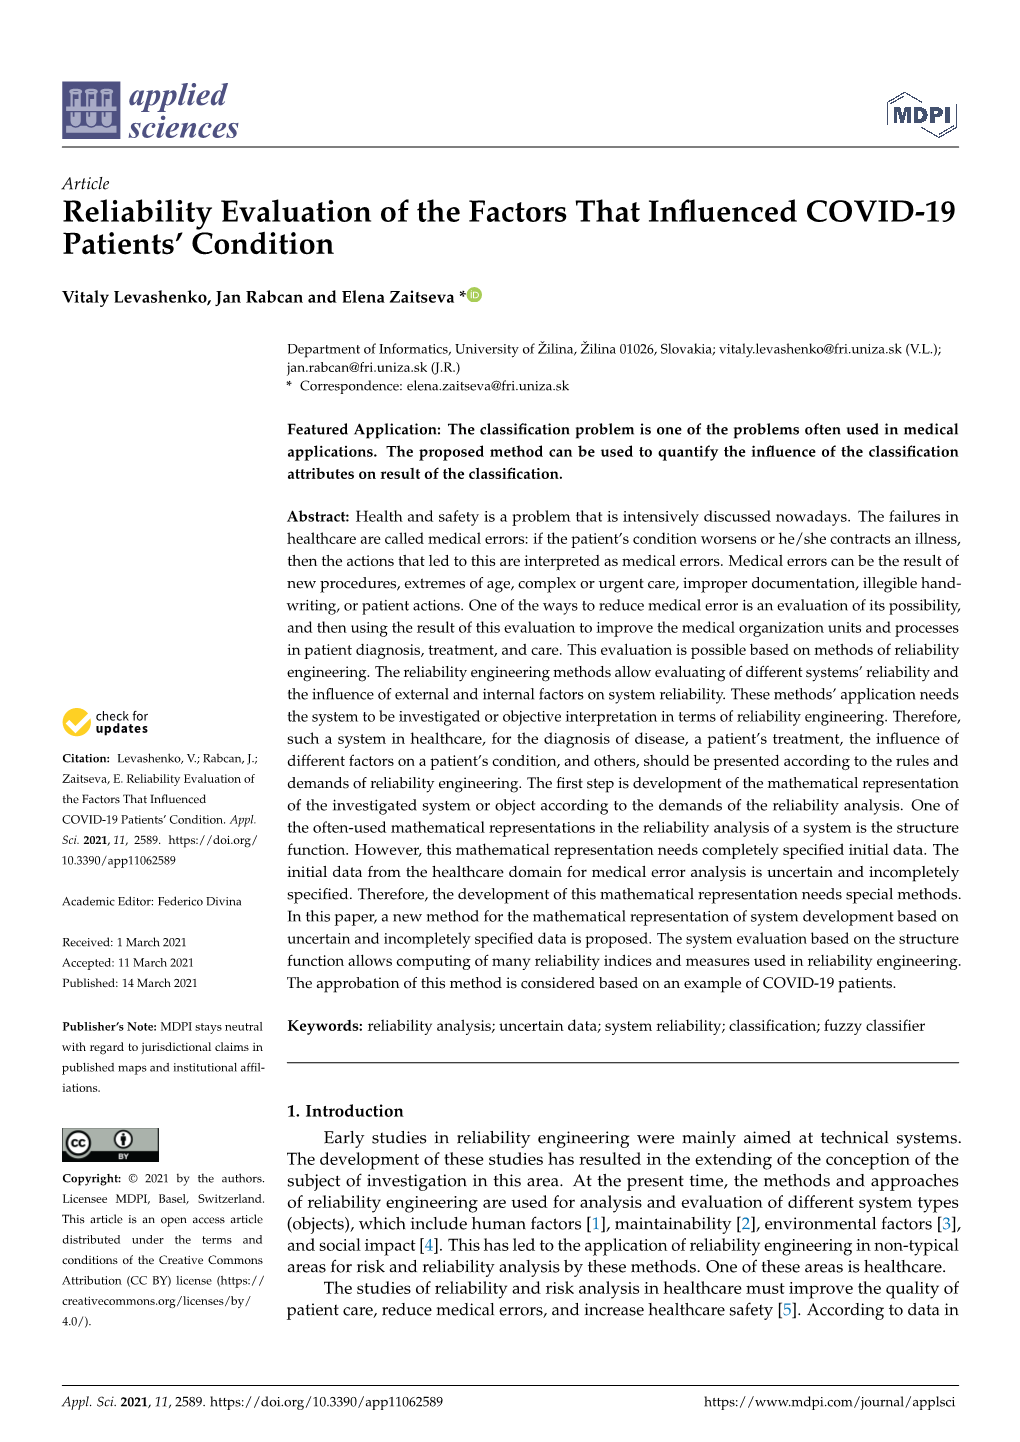 Reliability Evaluation of the Factors That Influenced COVID-19 Patients